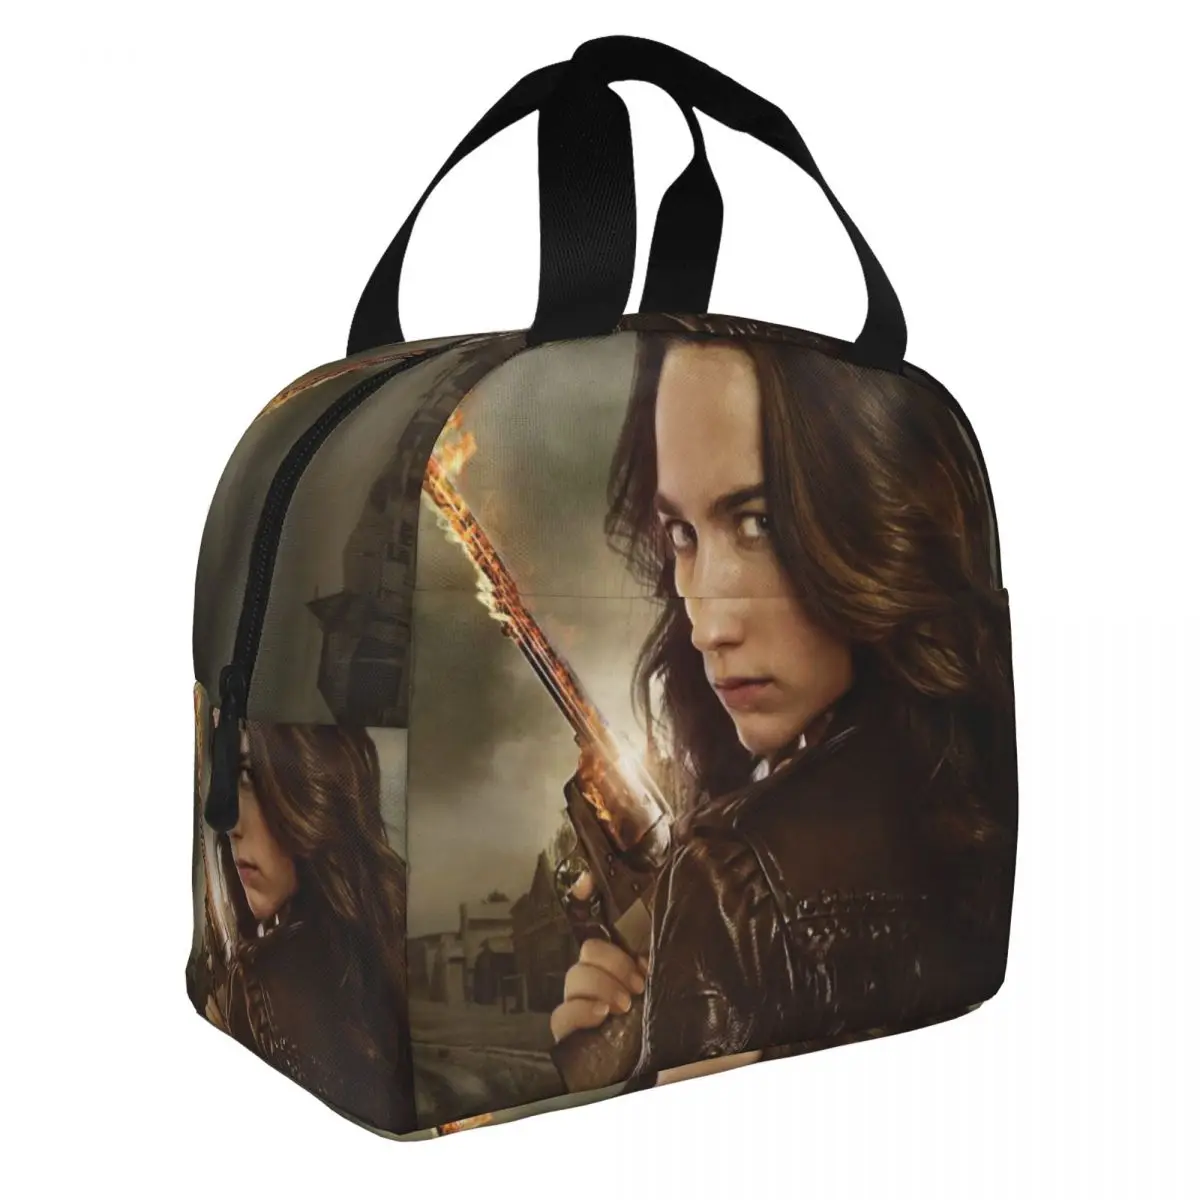 Wynonna Earp Lunch Bento Bags Portable Aluminum Foil thickened Thermal Cloth Lunch Bag for Women Men Boy